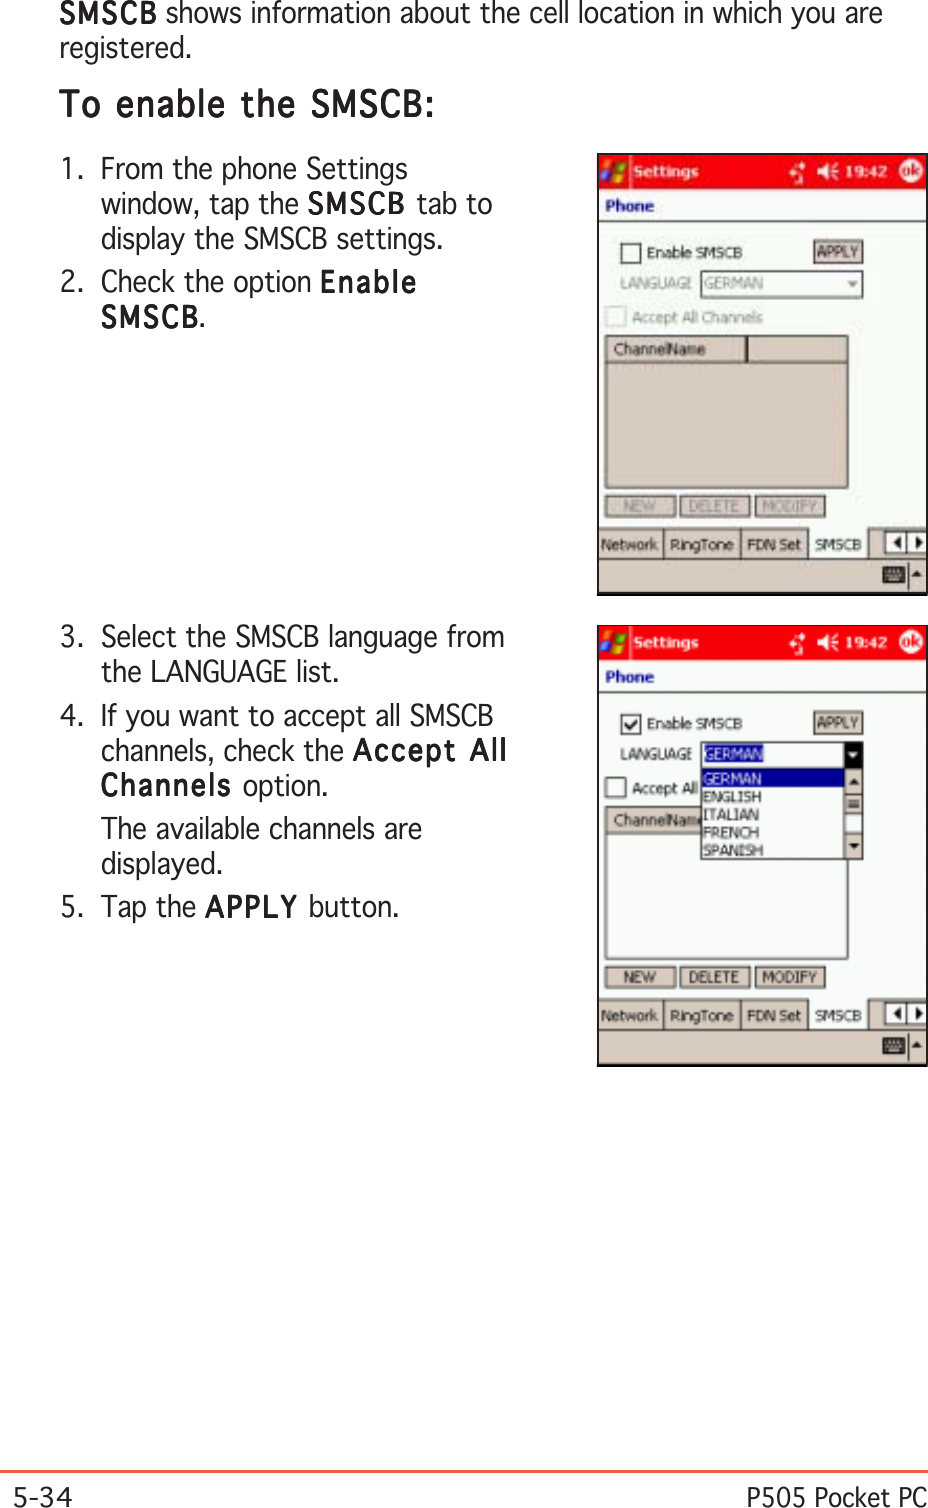 5-34P505 Pocket PCTo enable the SMSCB:To enable the SMSCB:To enable the SMSCB:To enable the SMSCB:To enable the SMSCB:1. From the phone Settingswindow, tap the SMSCBSMSCBSMSCBSMSCBSMSCB tab todisplay the SMSCB settings.2. Check the option EnableEnableEnableEnableEnableSMSCBSMSCBSMSCBSMSCBSMSCB.3. Select the SMSCB language fromthe LANGUAGE list.4. If you want to accept all SMSCBchannels, check the Accept AllAccept AllAccept AllAccept AllAccept AllChannelsChannelsChannelsChannelsChannels option.The available channels aredisplayed.5. Tap the APPLYAPPLYAPPLYAPPLYAPPLY button.SMSCBSMSCBSMSCBSMSCBSMS CB shows information about the cell location in which you areregistered.